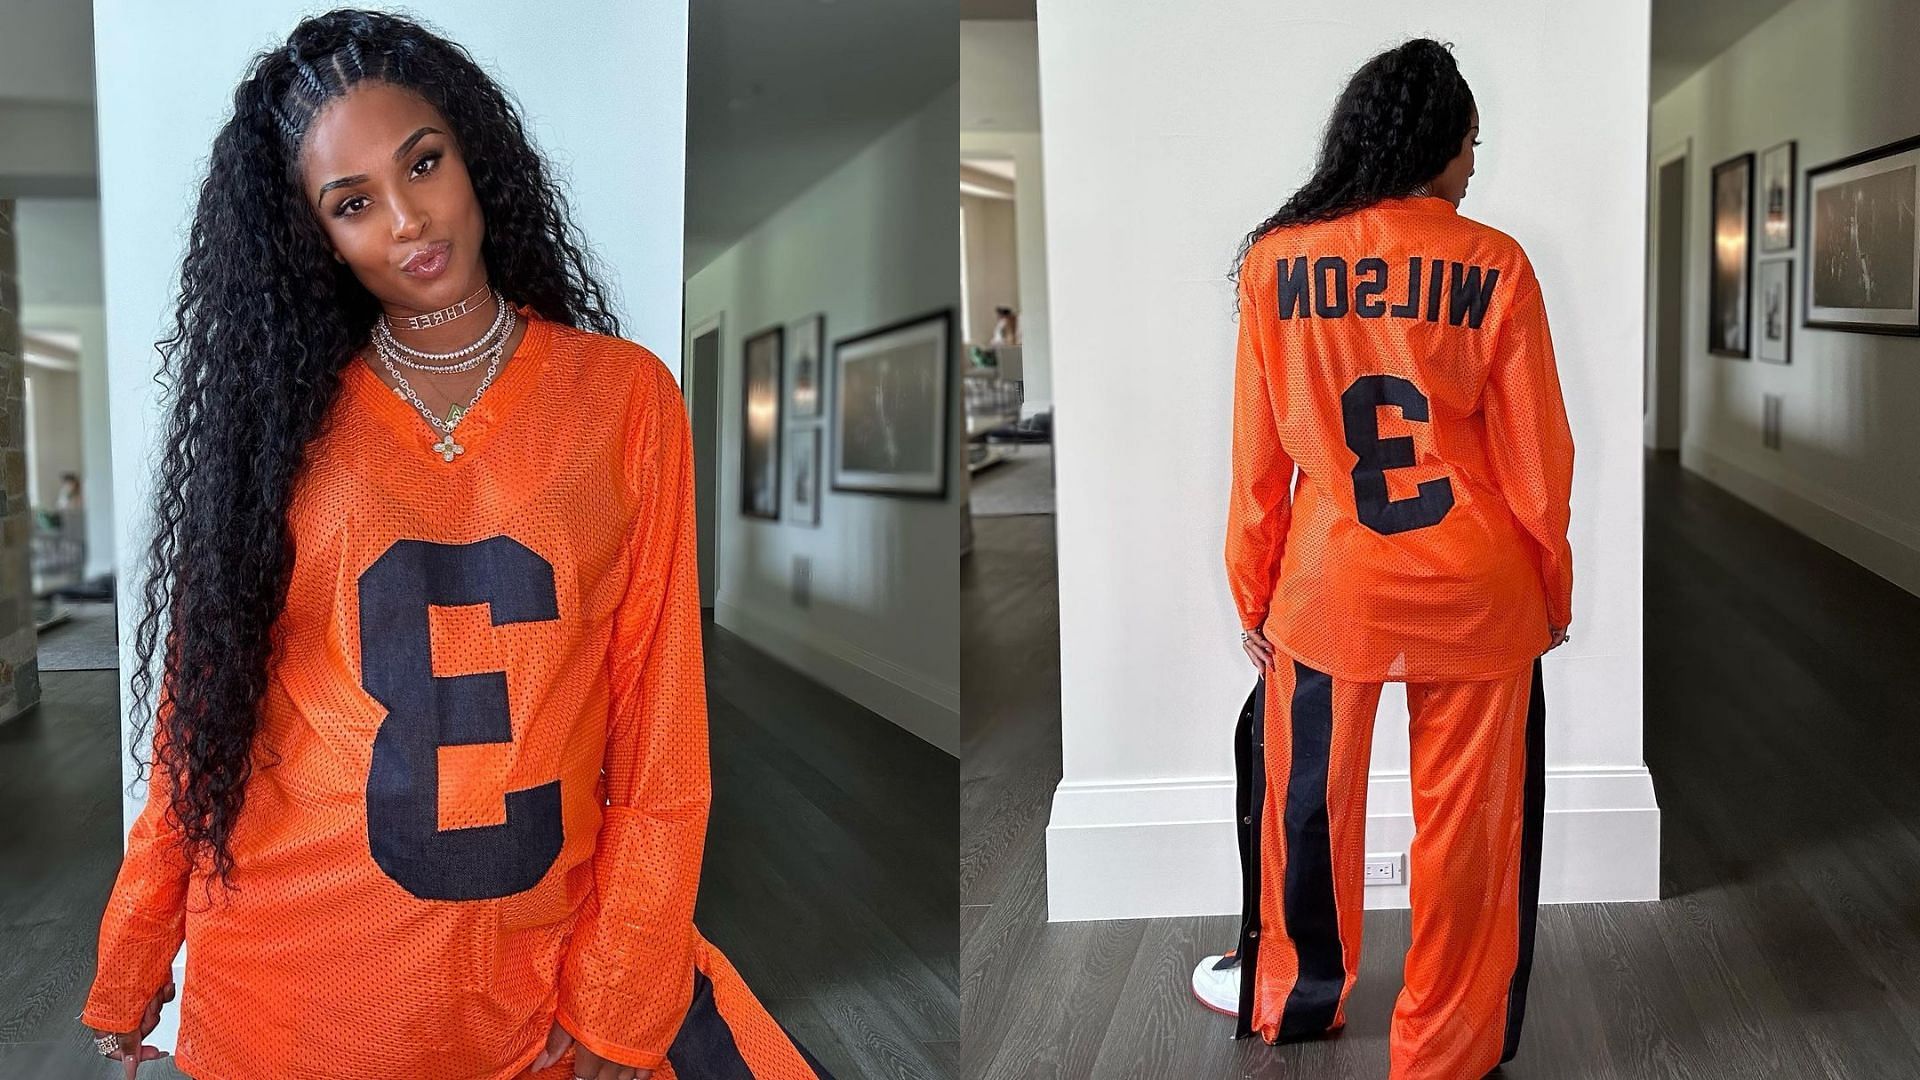 Ciara rocks an outfit inspired by her husband&#039;s football uniform. (Image credit: Ciara on Instagram)